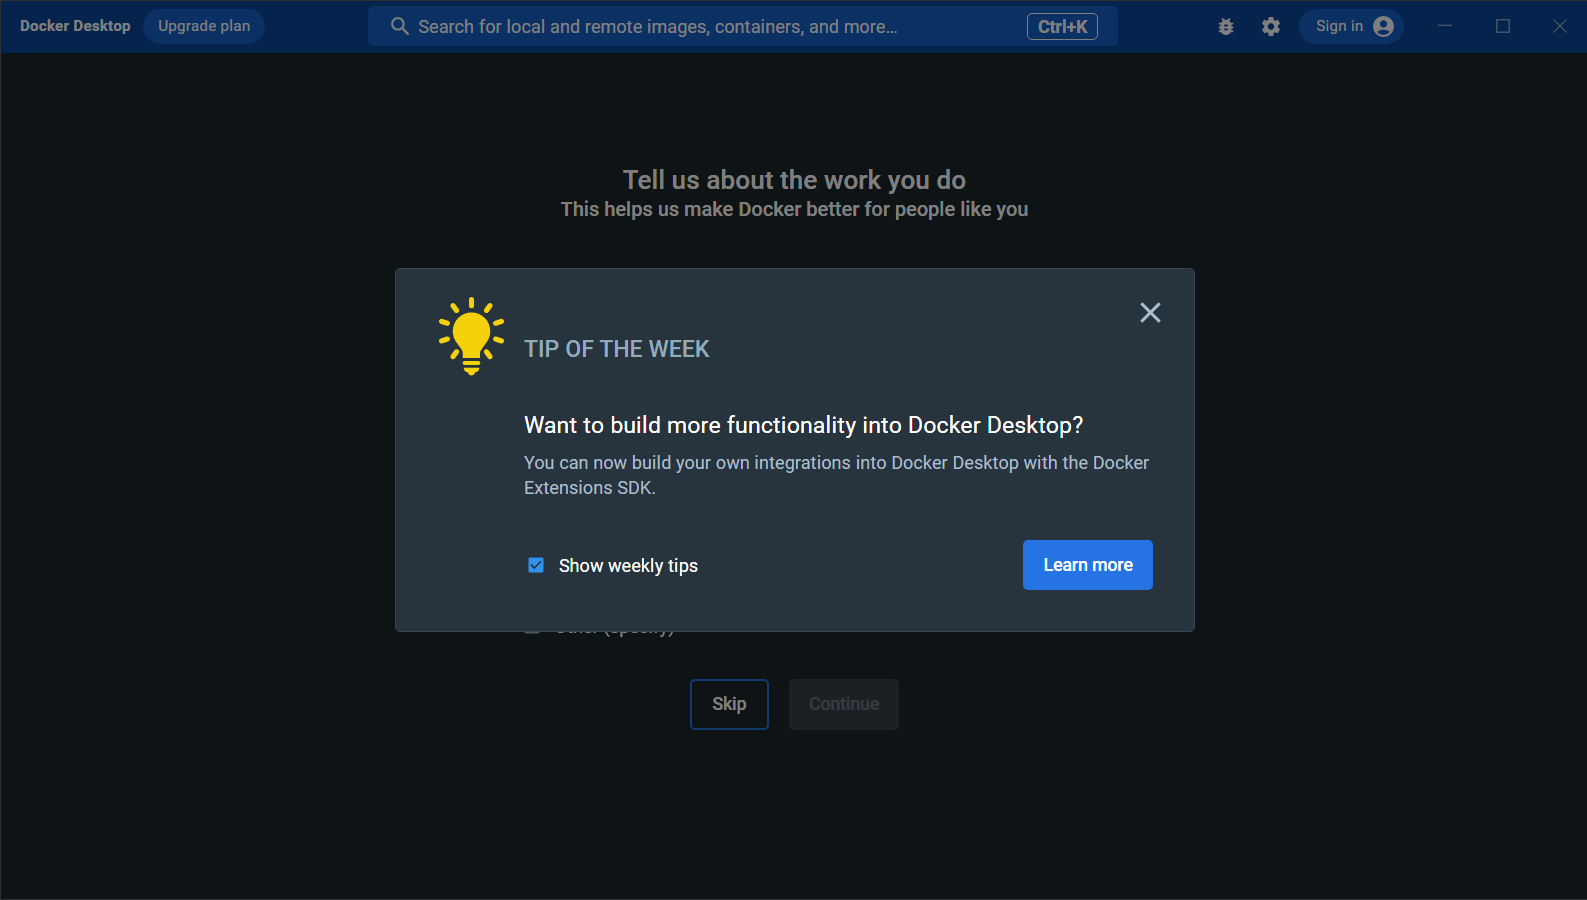 Get Started with Docker - Part 2b: Windows 11 Install Guide